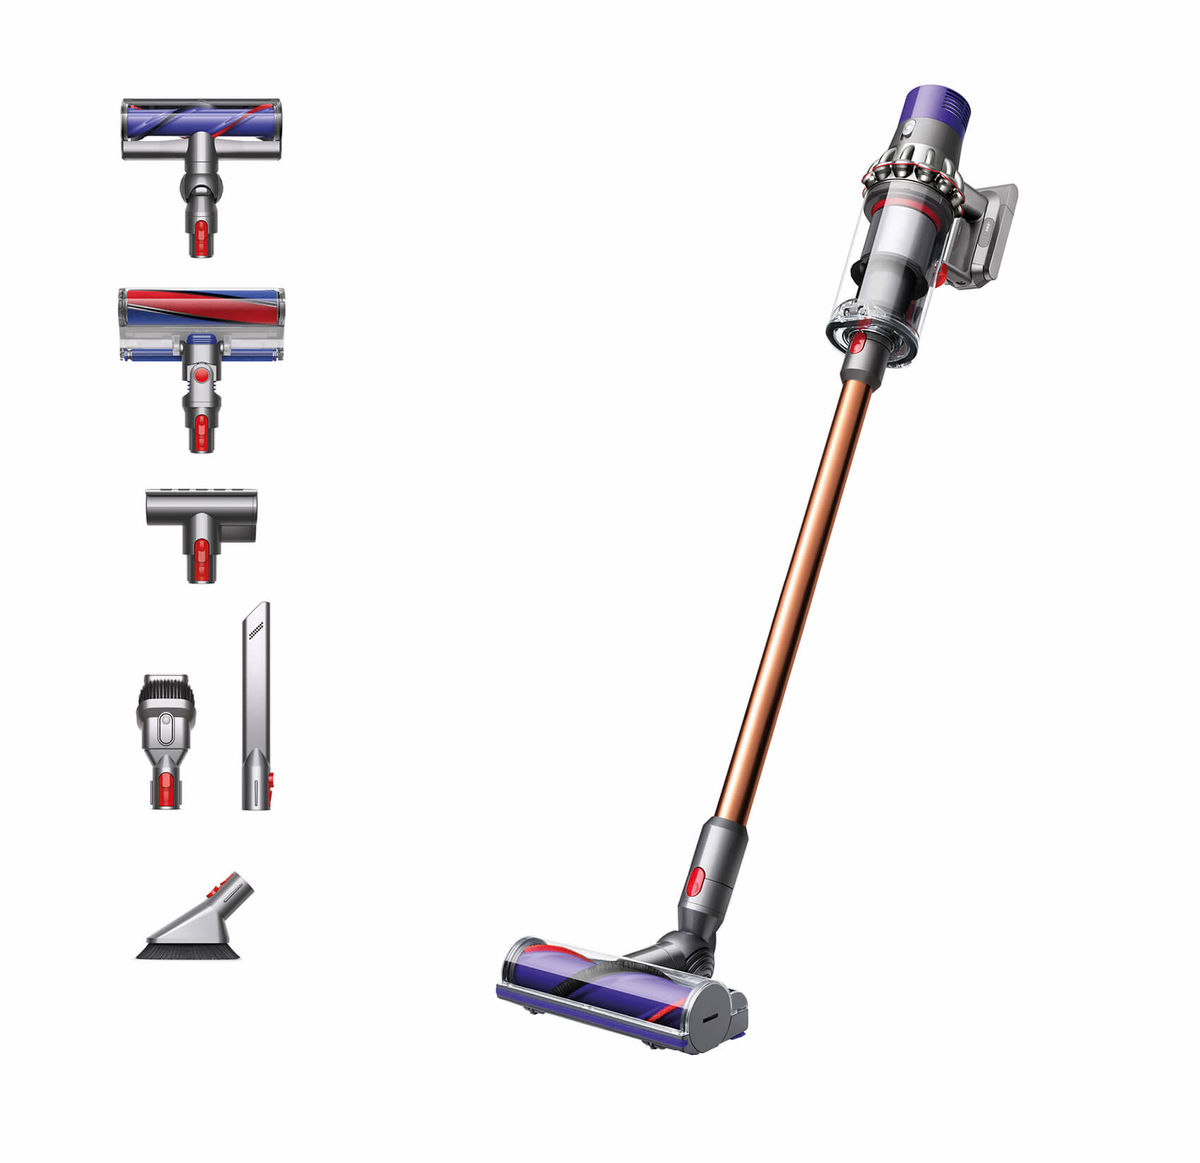 Image of Dyson V10 Absolute kabelloser Staubsauger bei nettoshop.ch